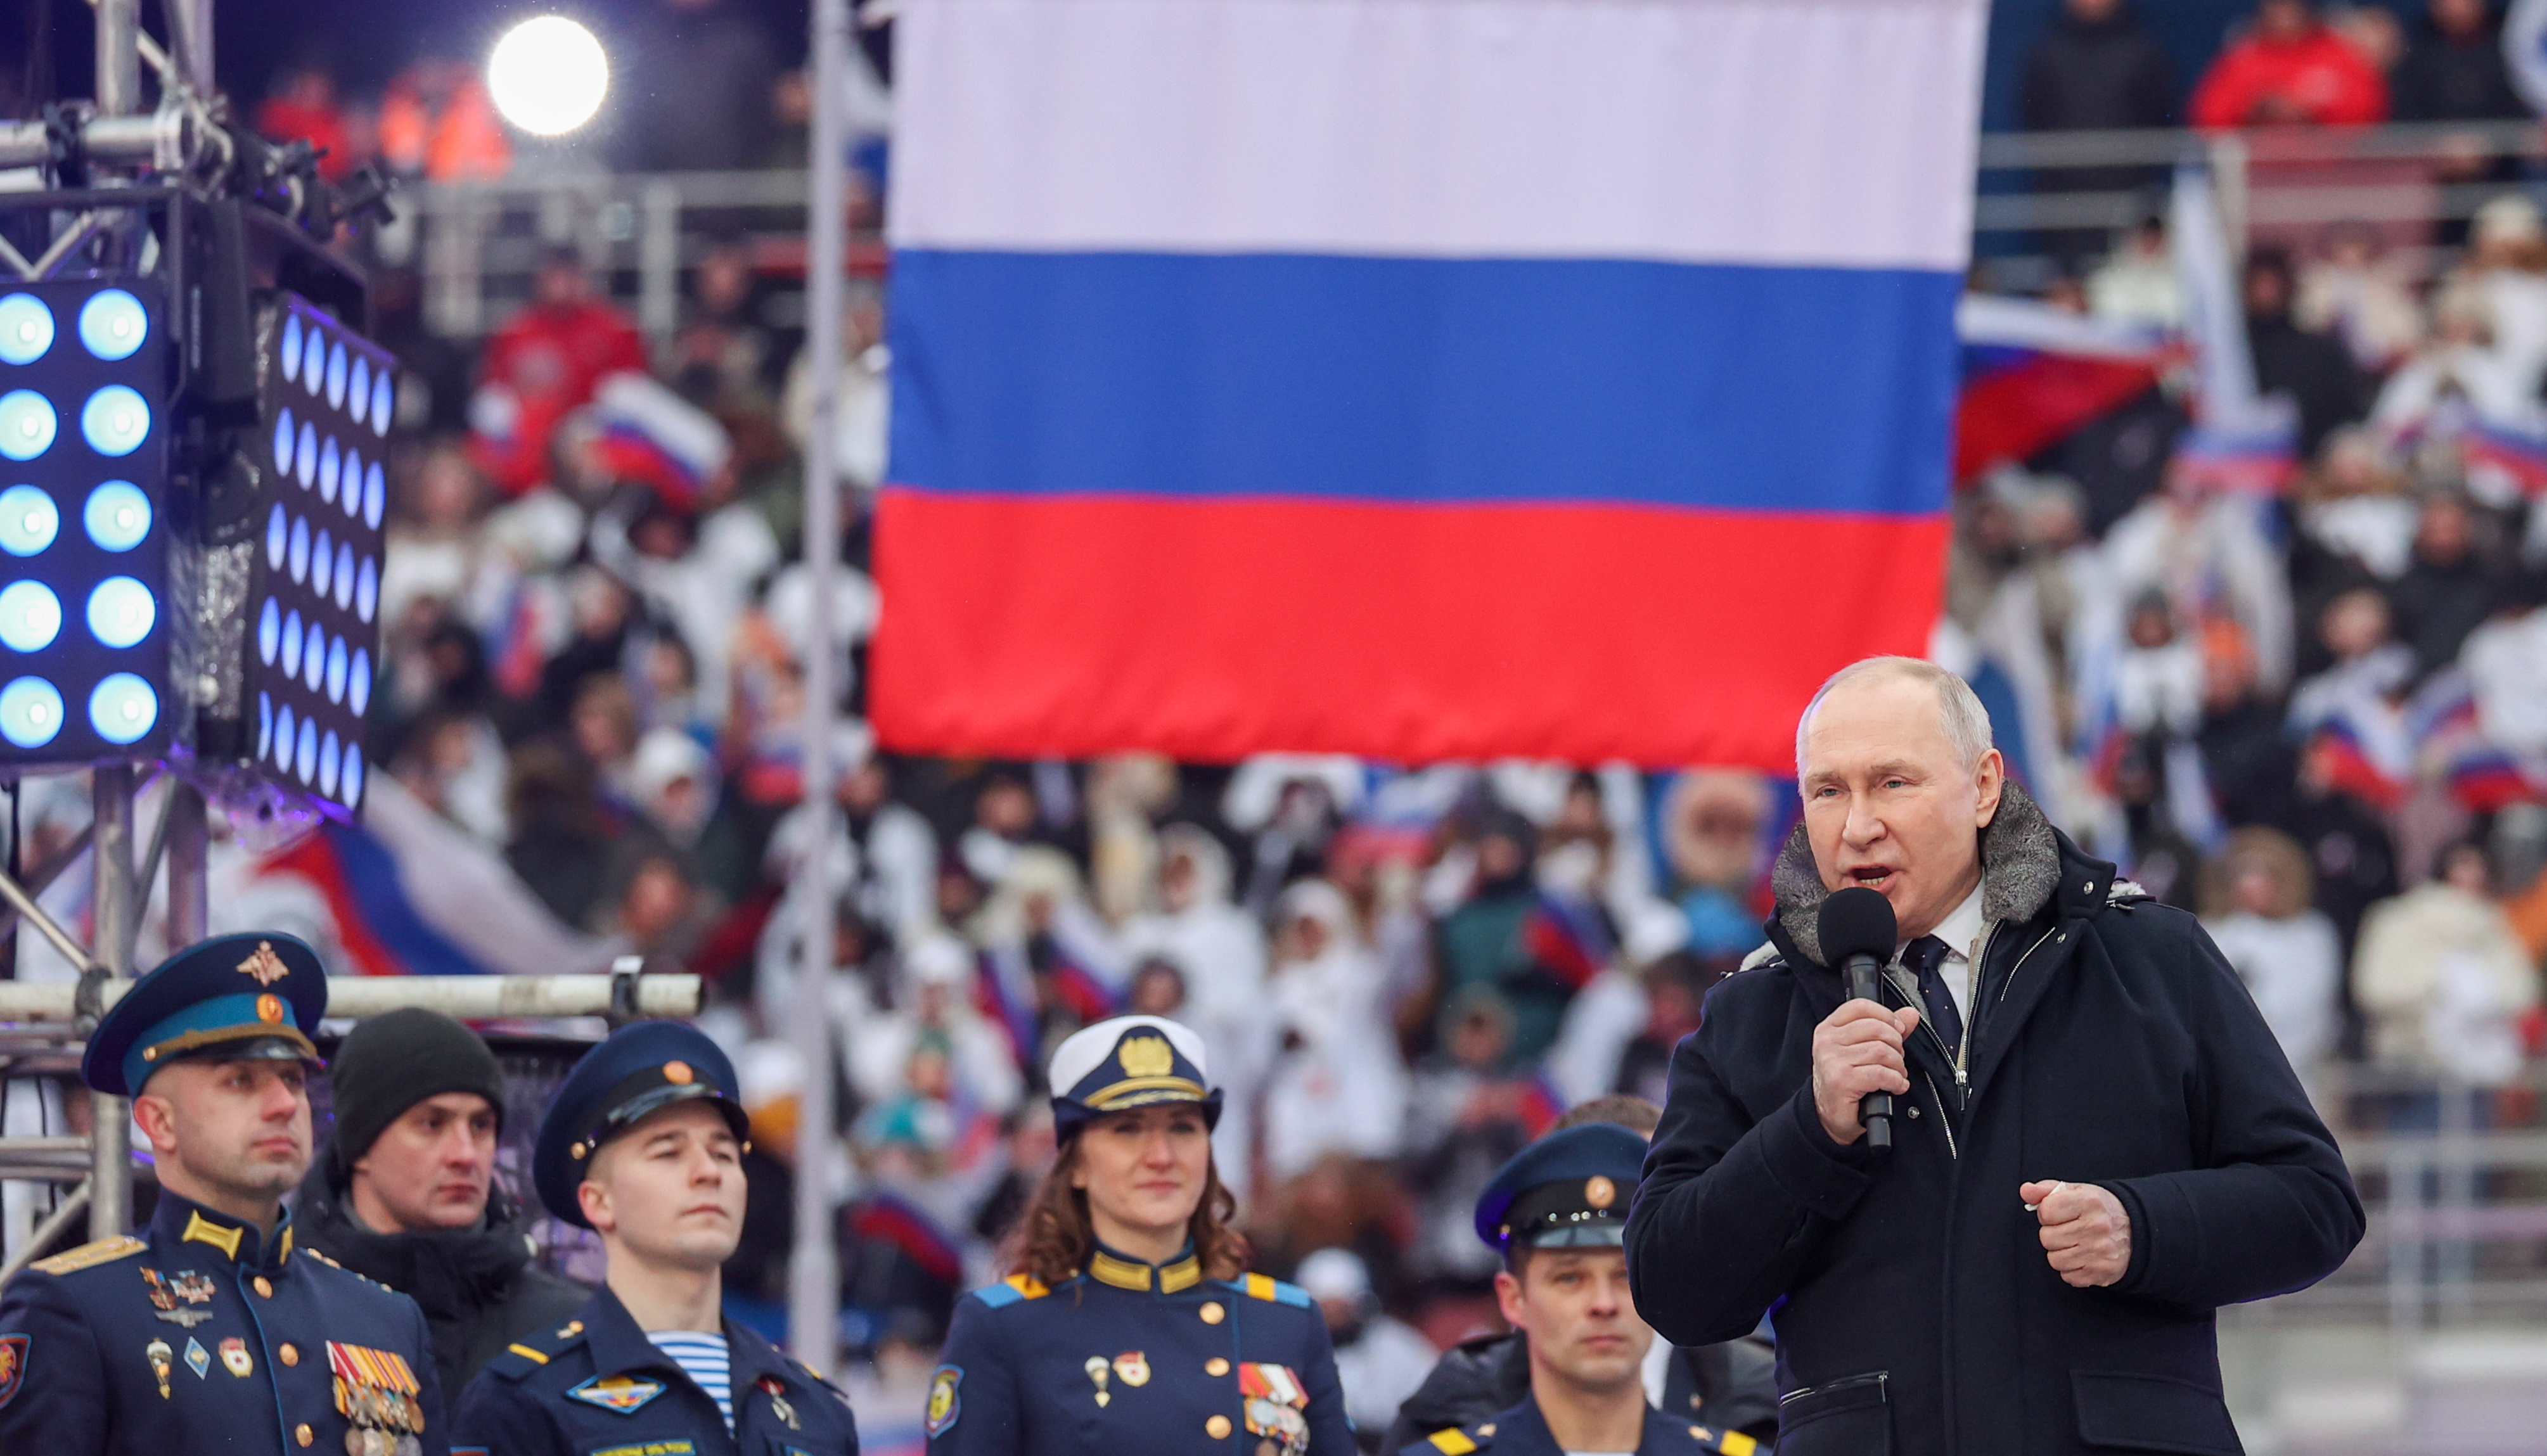 RUSSIA, MOSCOW - FEBRUARY 22, 2023: Russia‘s President Vladimir Putin (R) addresses an open-air concert and rally titled “Glory to Defenders of Our Fatherland” in Luzhniki, on the eve of Russia’s Defender of the Fatherland Day. Sergei Bobylev/TASS